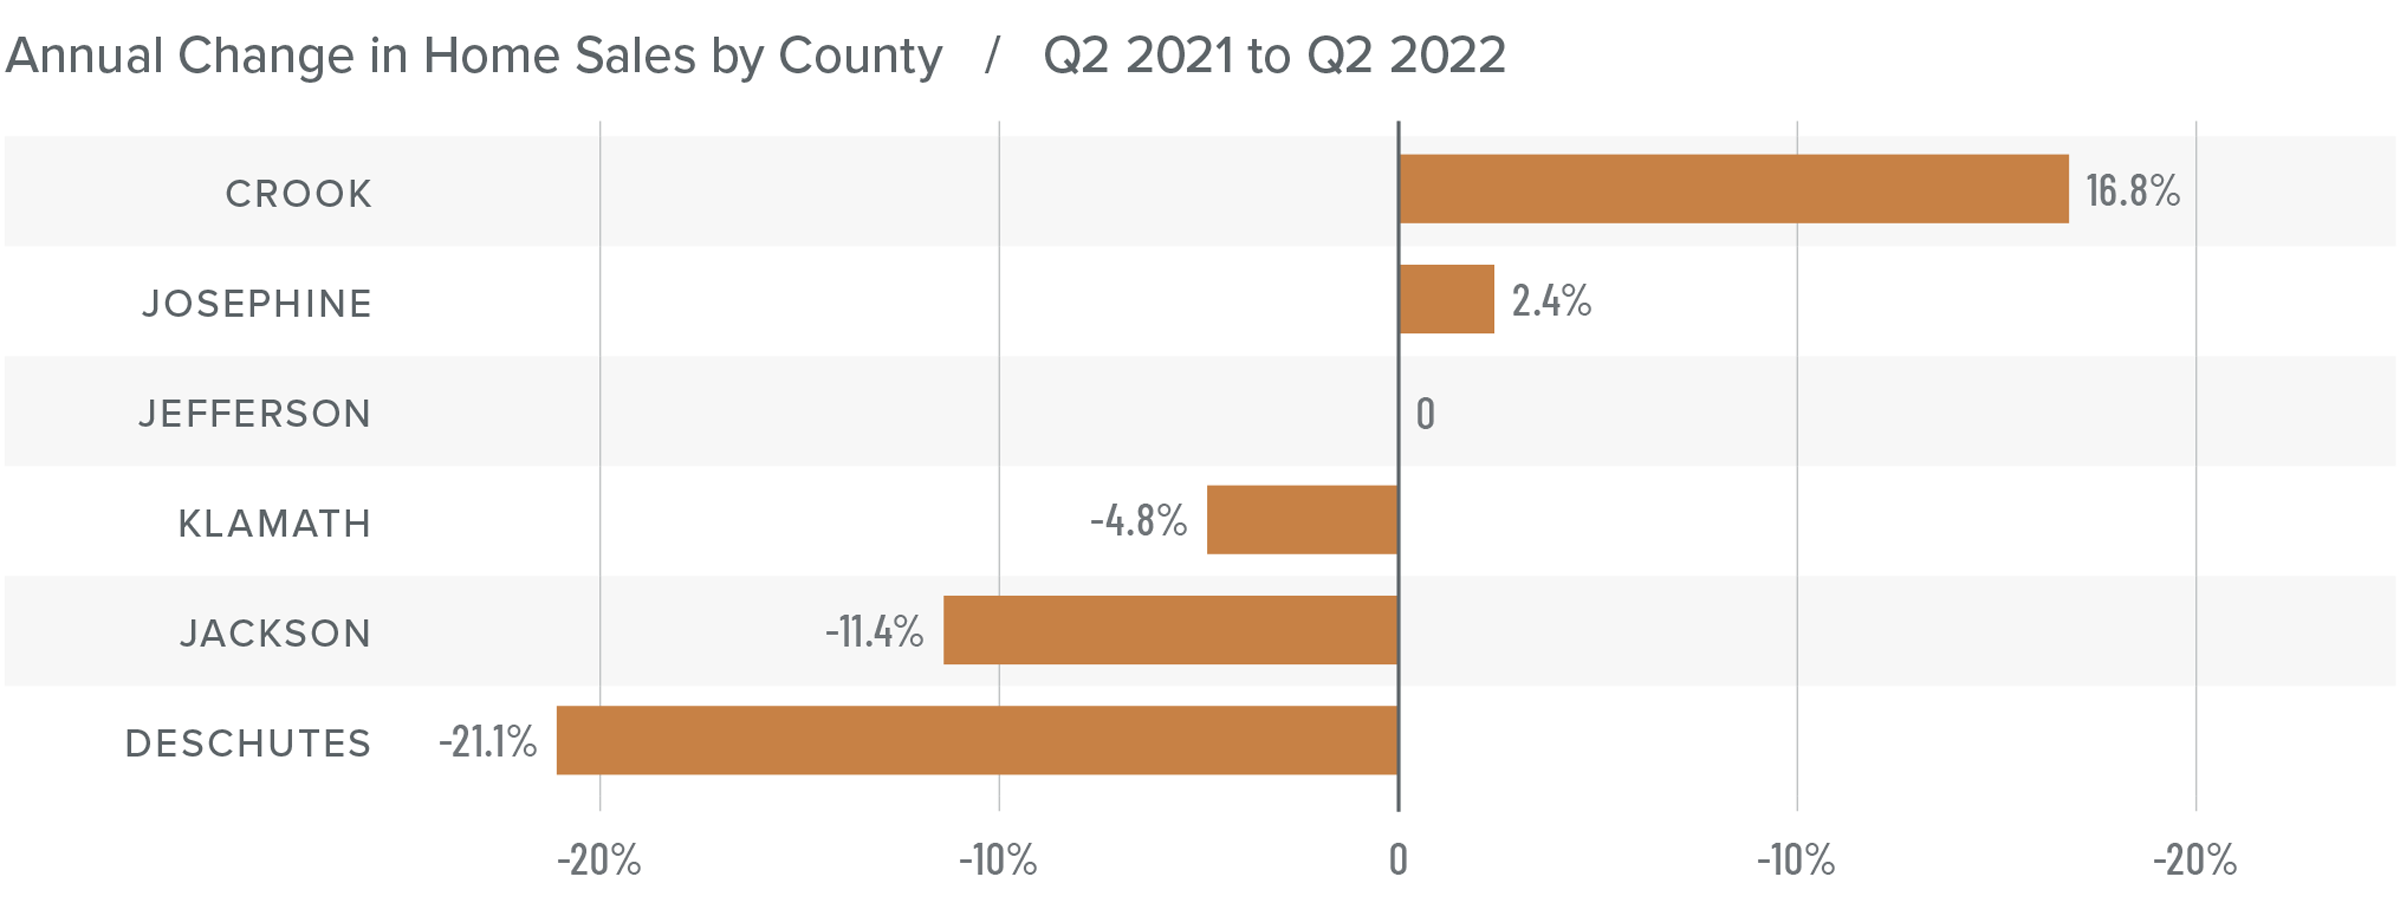 A bar graph showing the annual change in home sales for various counties in Central and Southern Oregon from Q2 2021 to Q2 2022. There are two counties with positive percentage year-over-year changes: Crook at 16.8% and Josephine at 2.4%. All other counties show a negative year-over-year change. Here are the totals: Klamath -4.8%, Jackson -11.4%, and Deschutes -21.1%.